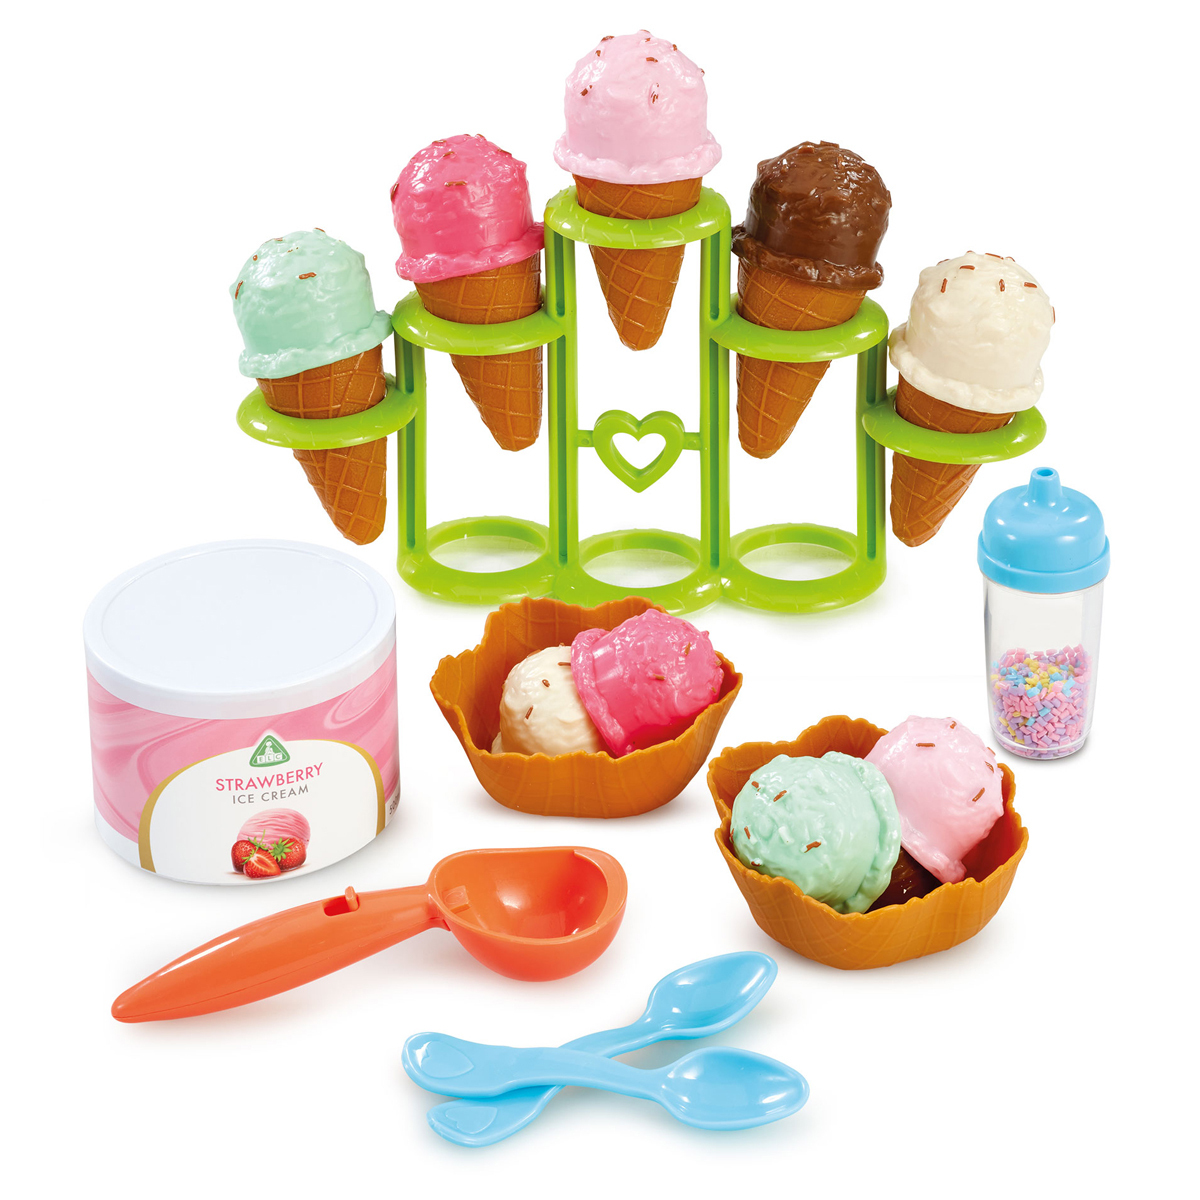 Early Learning Centre Ice Cream Playset | Early Learning Centre